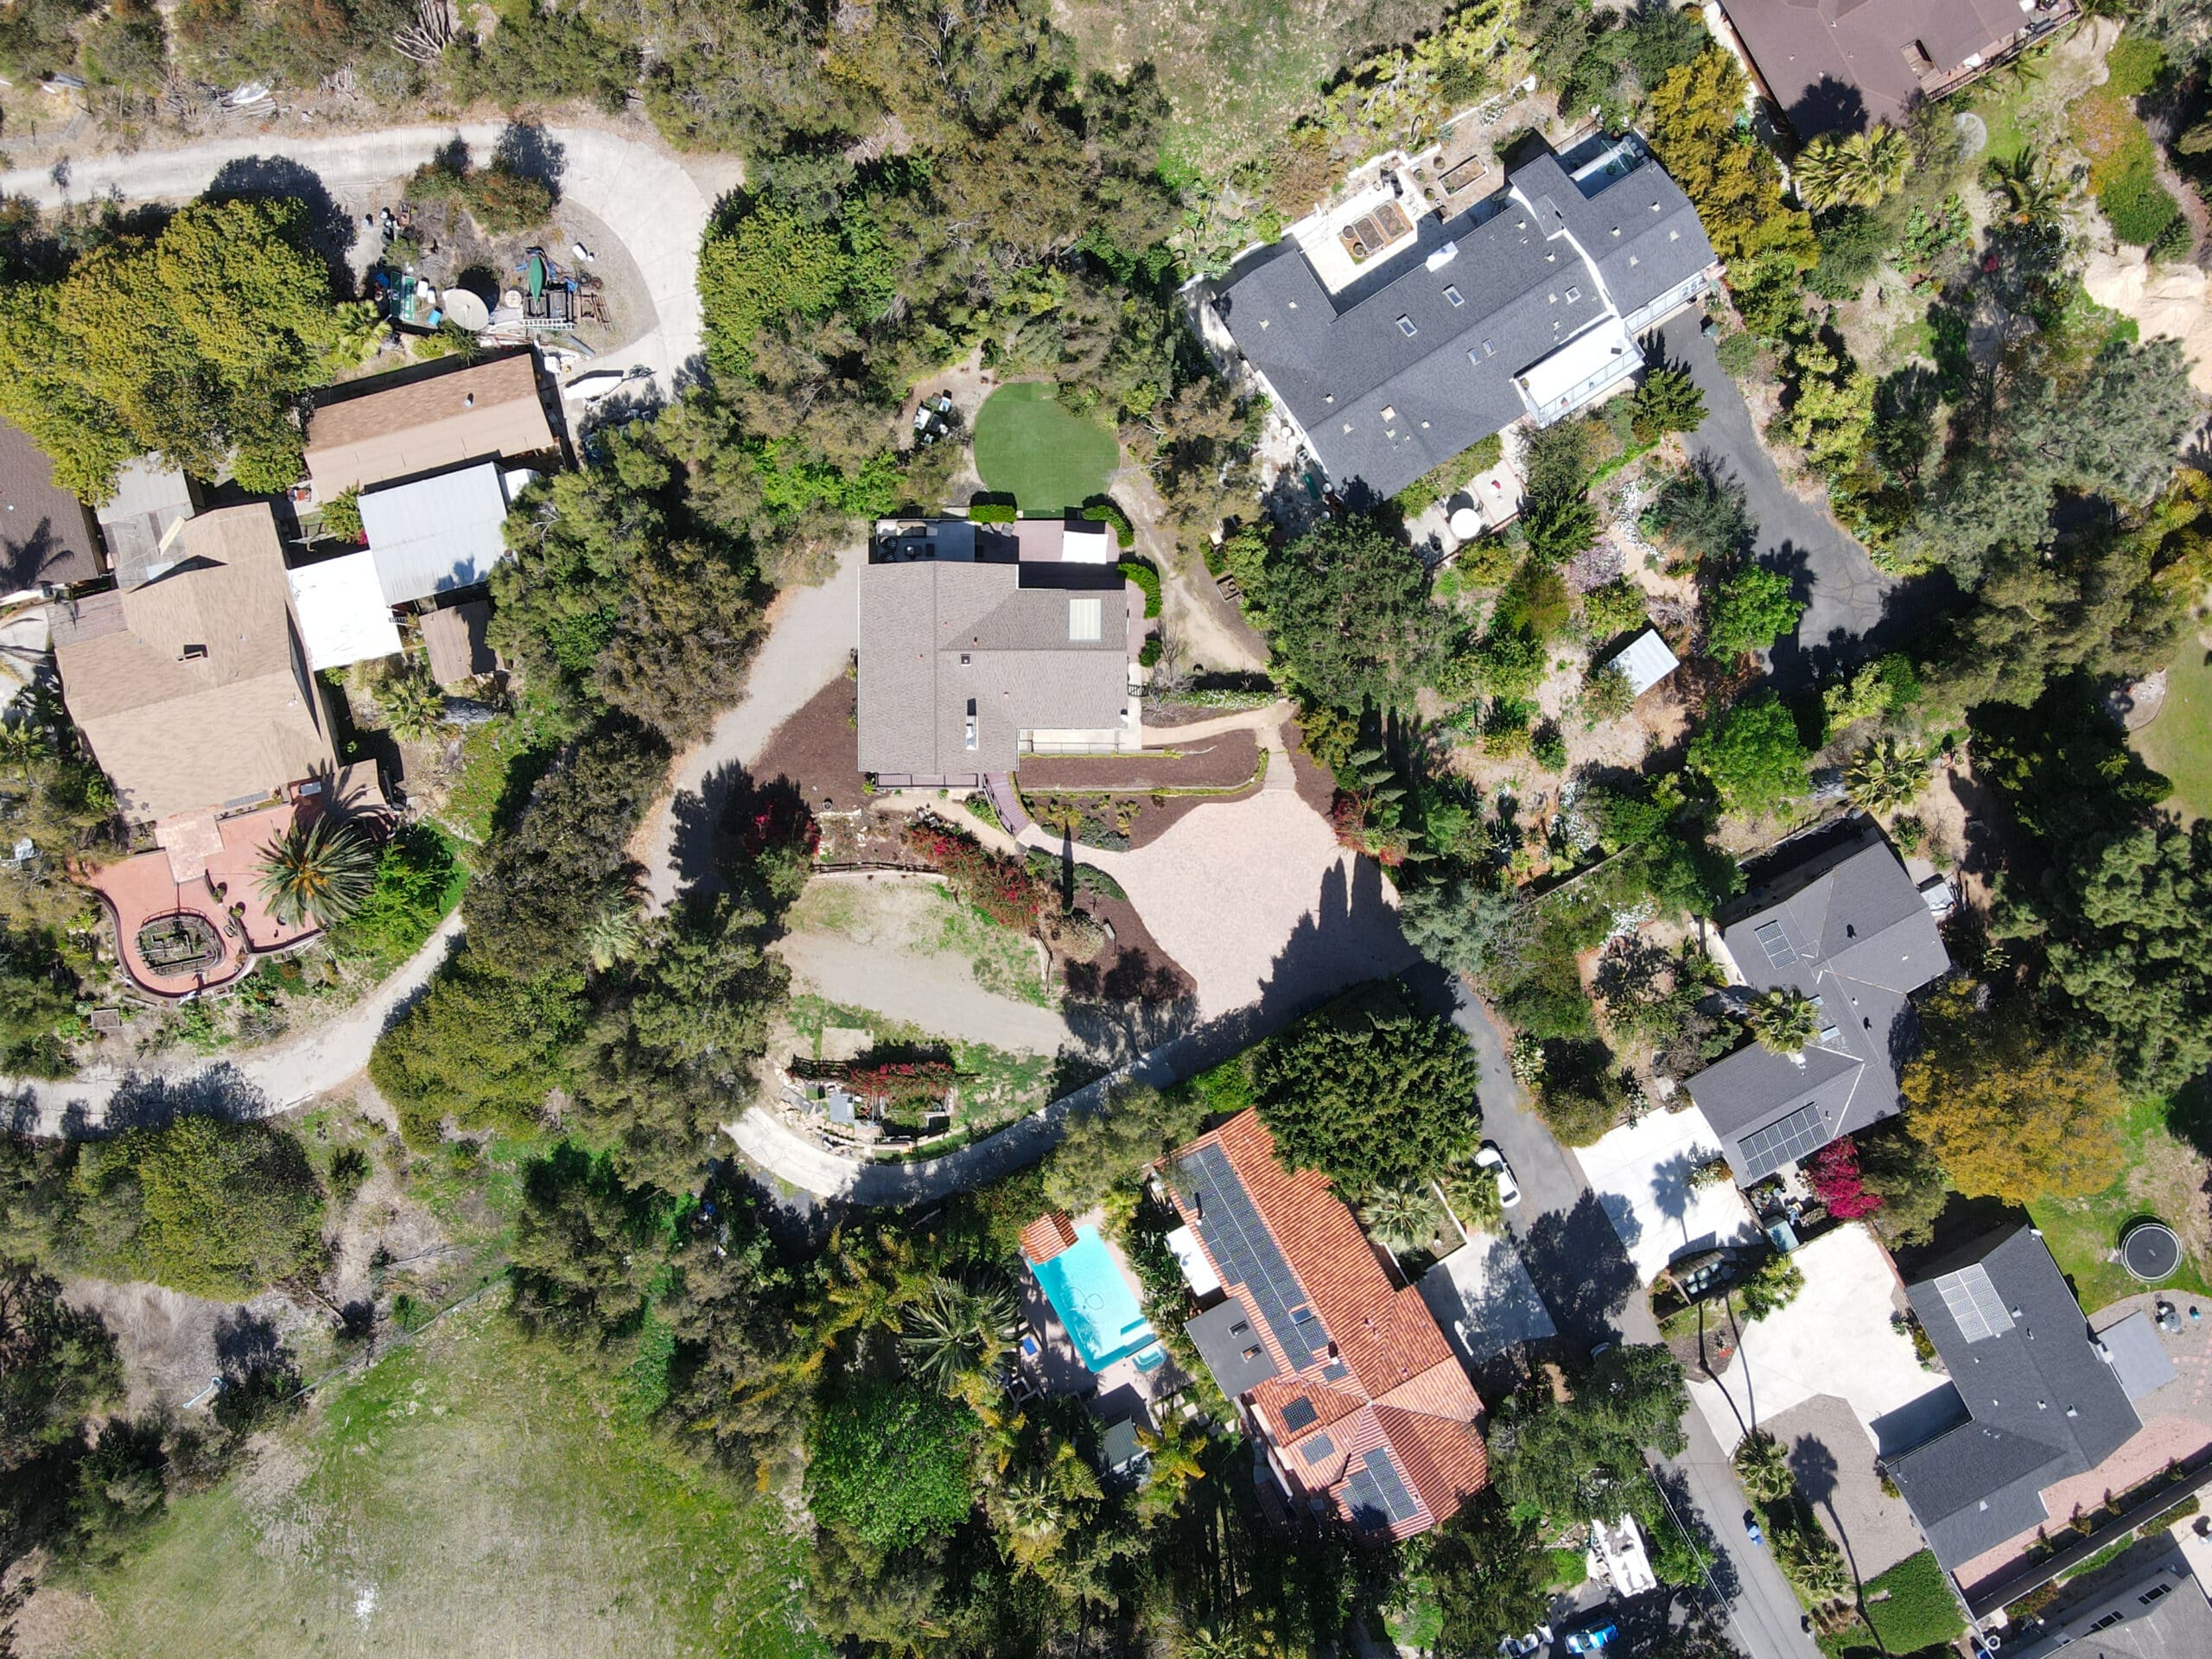 Overhead view of an exclusive property in Rancho Santa Fe showcasing potential security coverage areas for residential protection services.